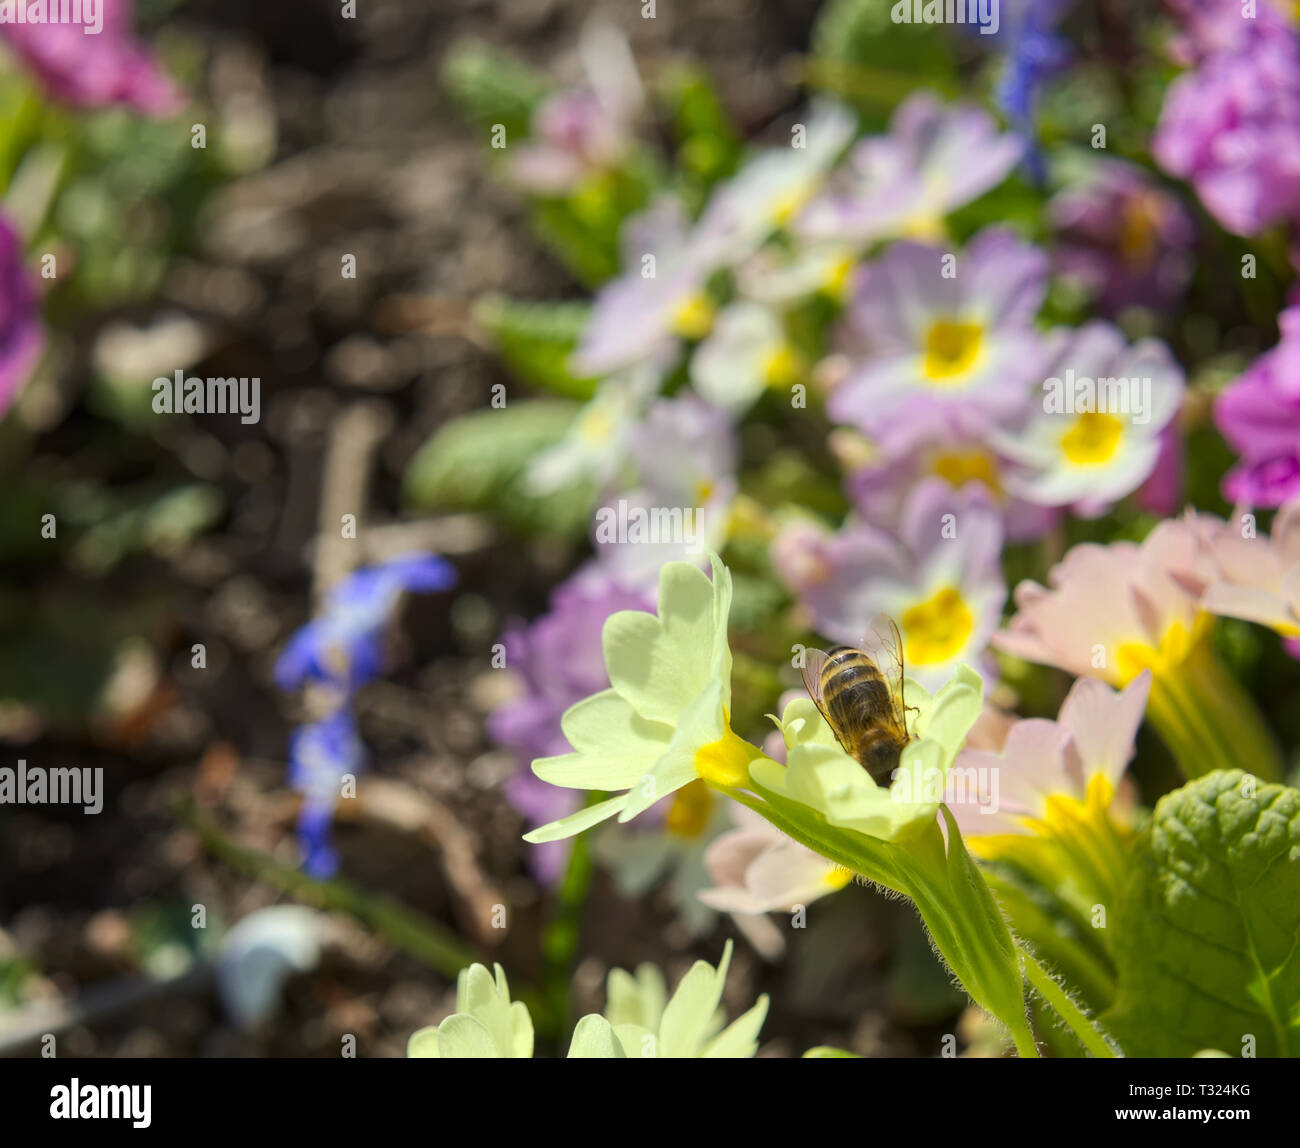 Bee searching for nectar in a yellow primel (primula). Stock Photo